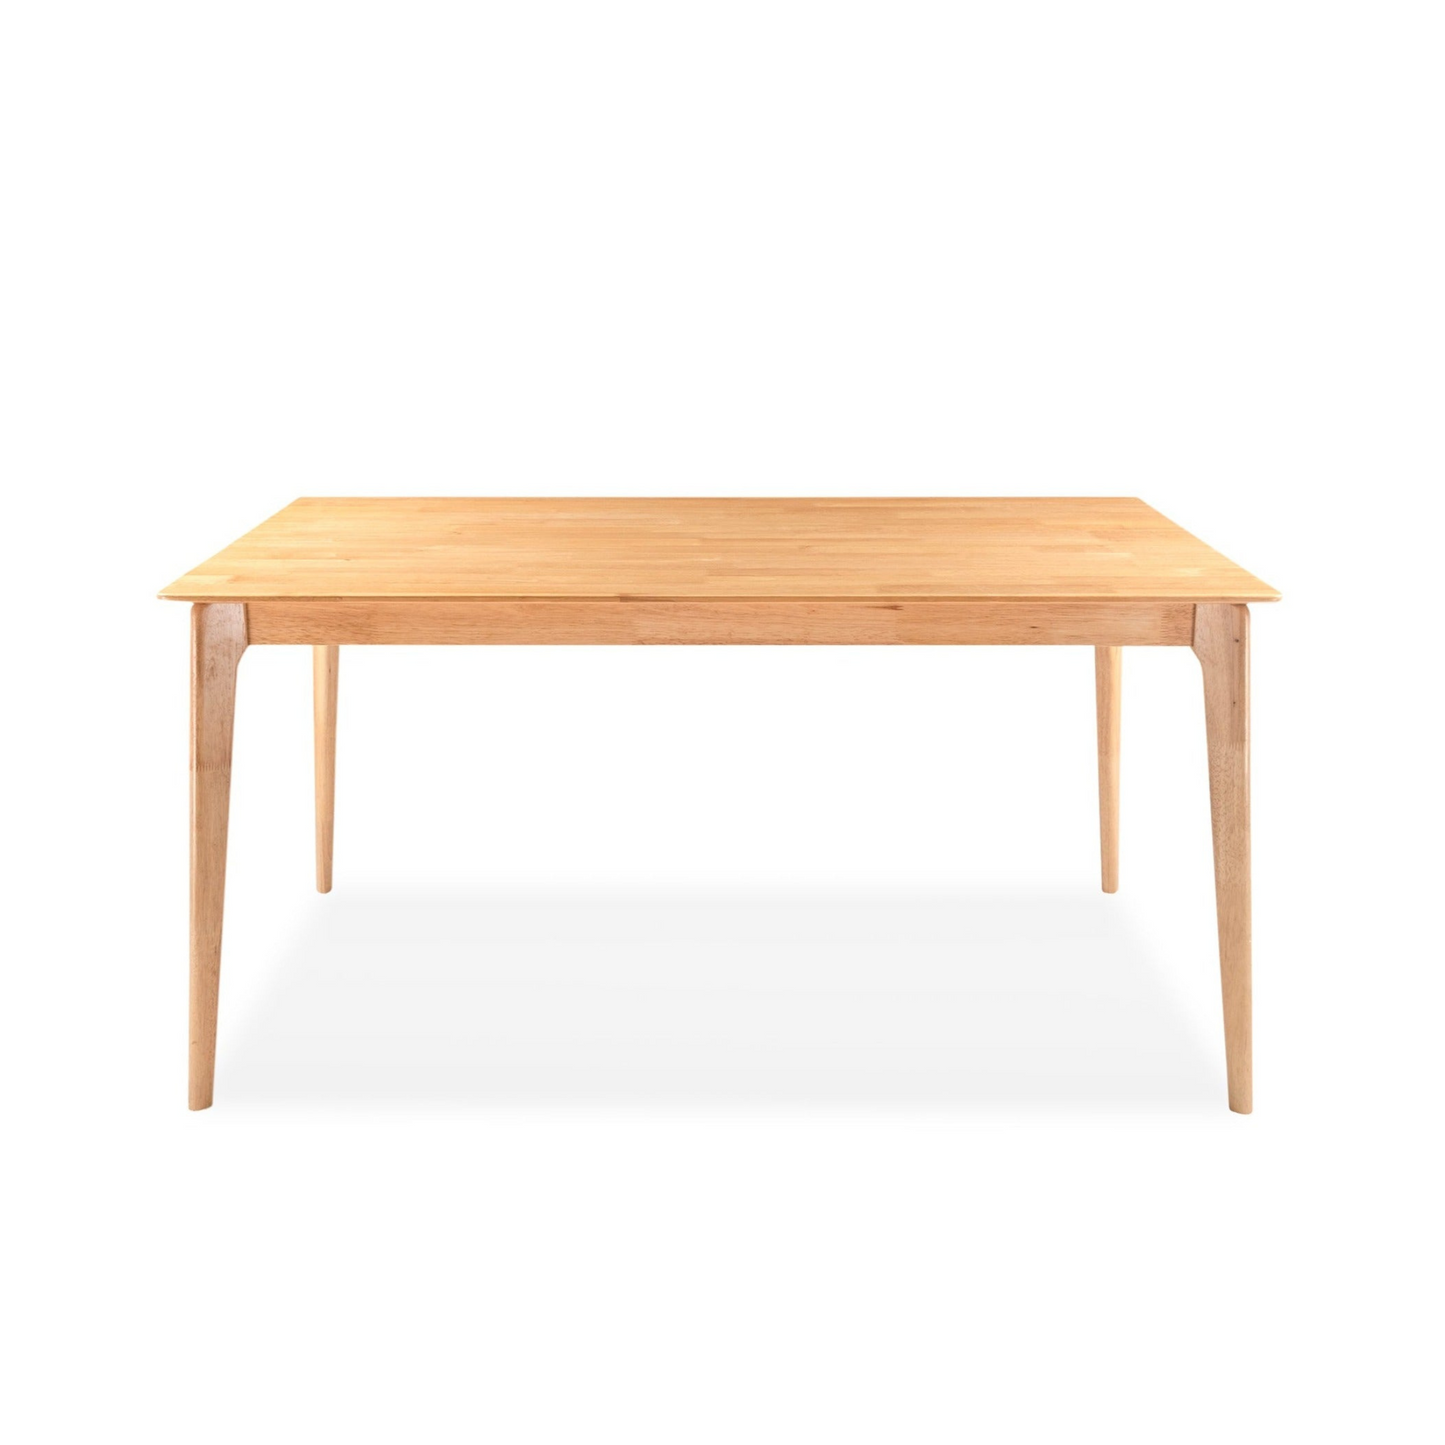 Hazelnut 1.5m Dining Table In Natural